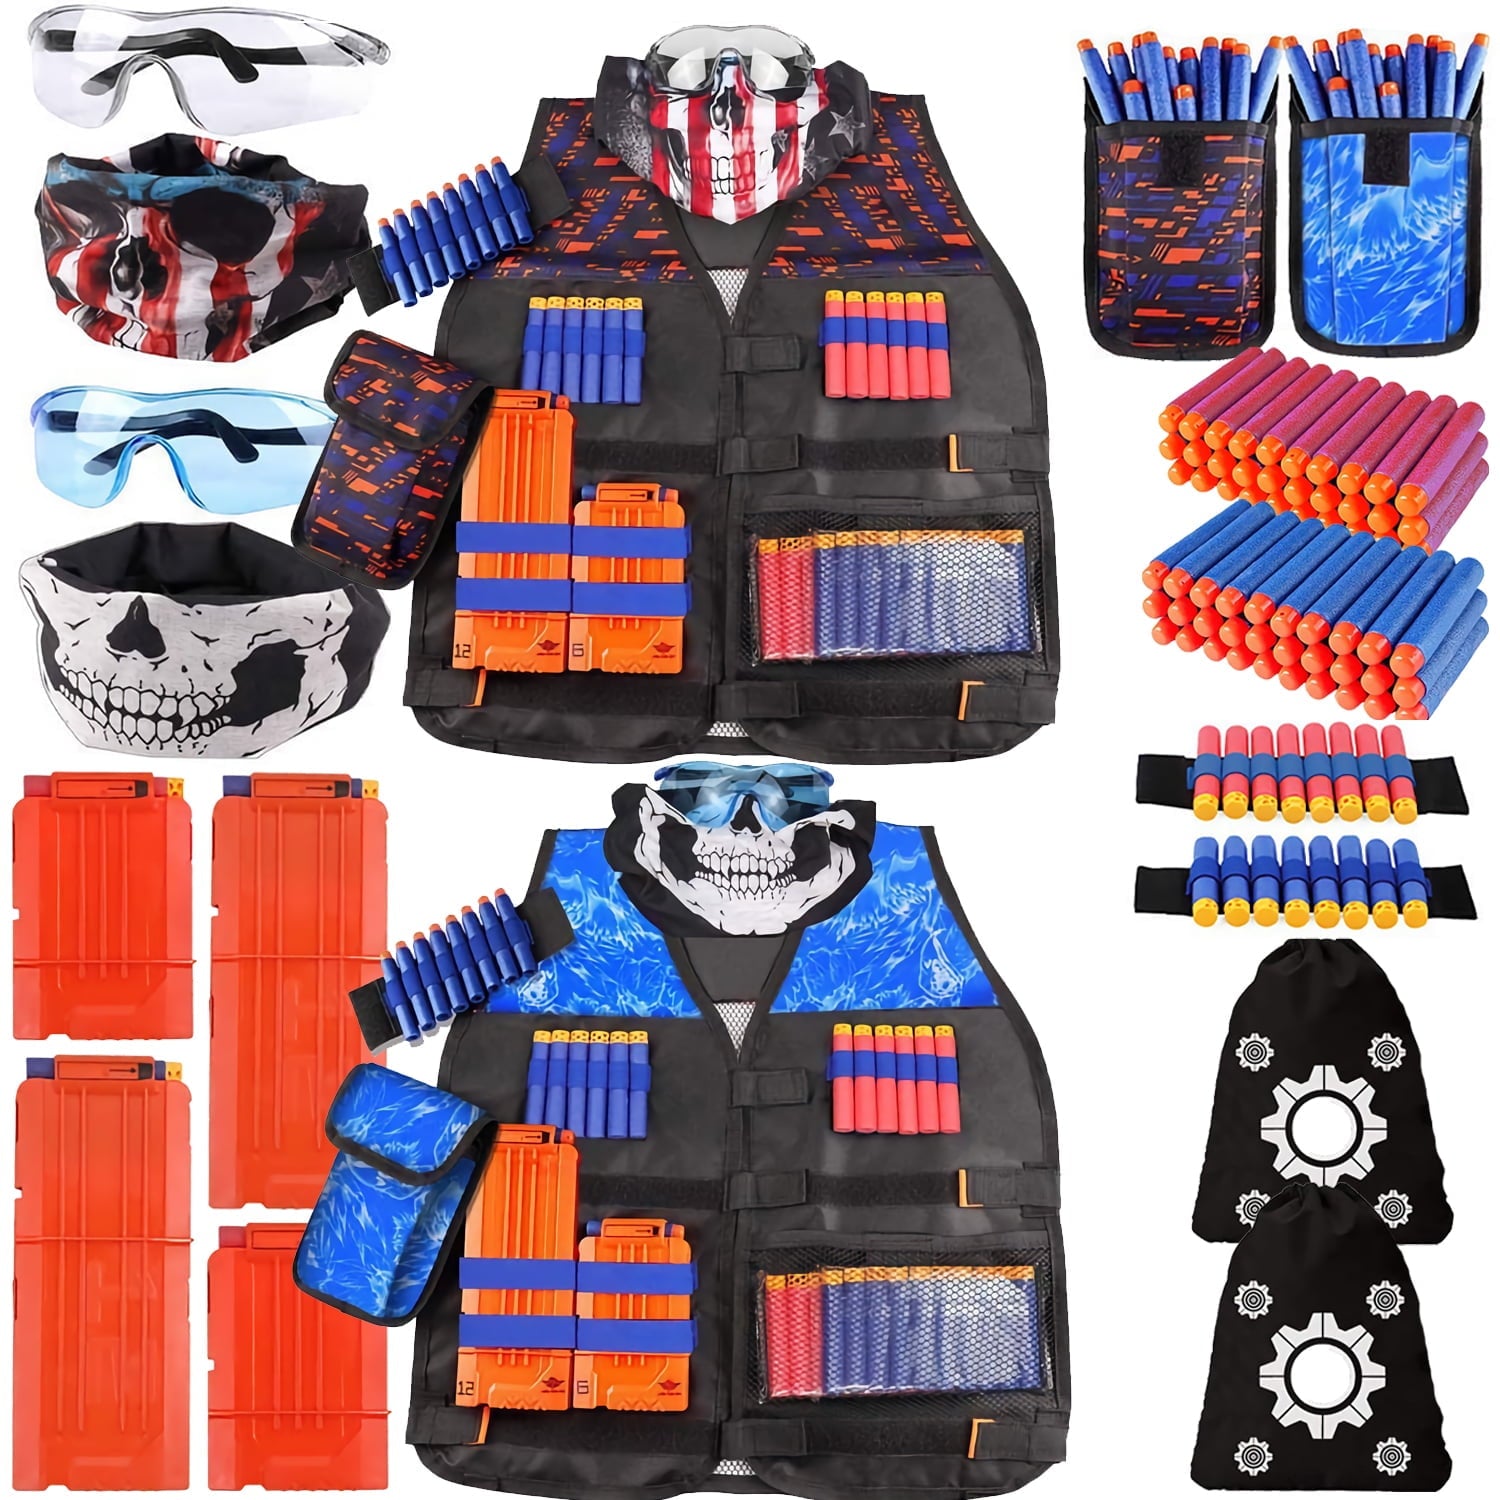 Canaan Kids Tactical Vest 2 Pack Set Compatible with N.e.r.f. Gun Toys – 2 Vests With Dart Pouches, Mask, Glasses, 80 Refills, Wrist B &For Kids Safe Play